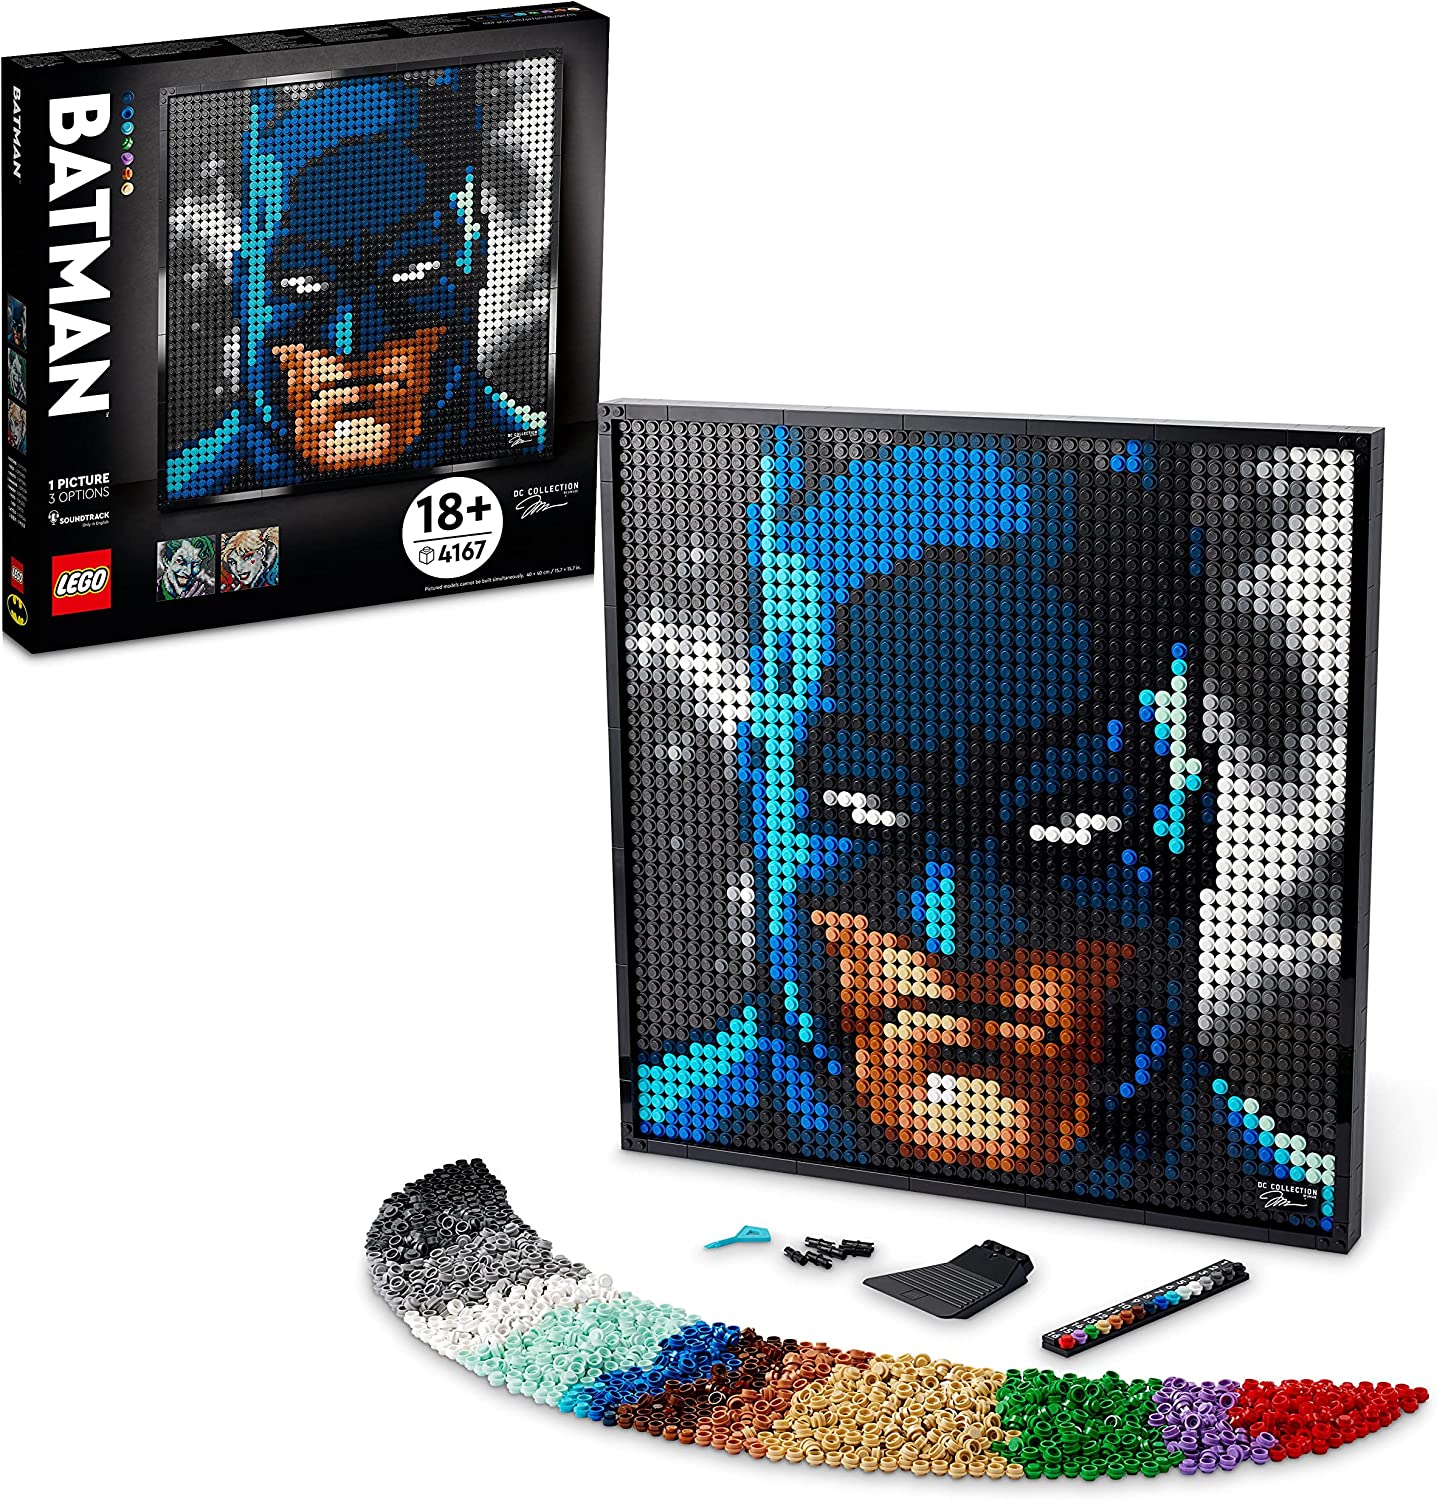 LEGO 31205 Art Jim Lee Batman Collection Canvas Wall Decor with The Joker or Harley Quinn, DIY Poster, Big Set for Adults, Crafts Gift Idea